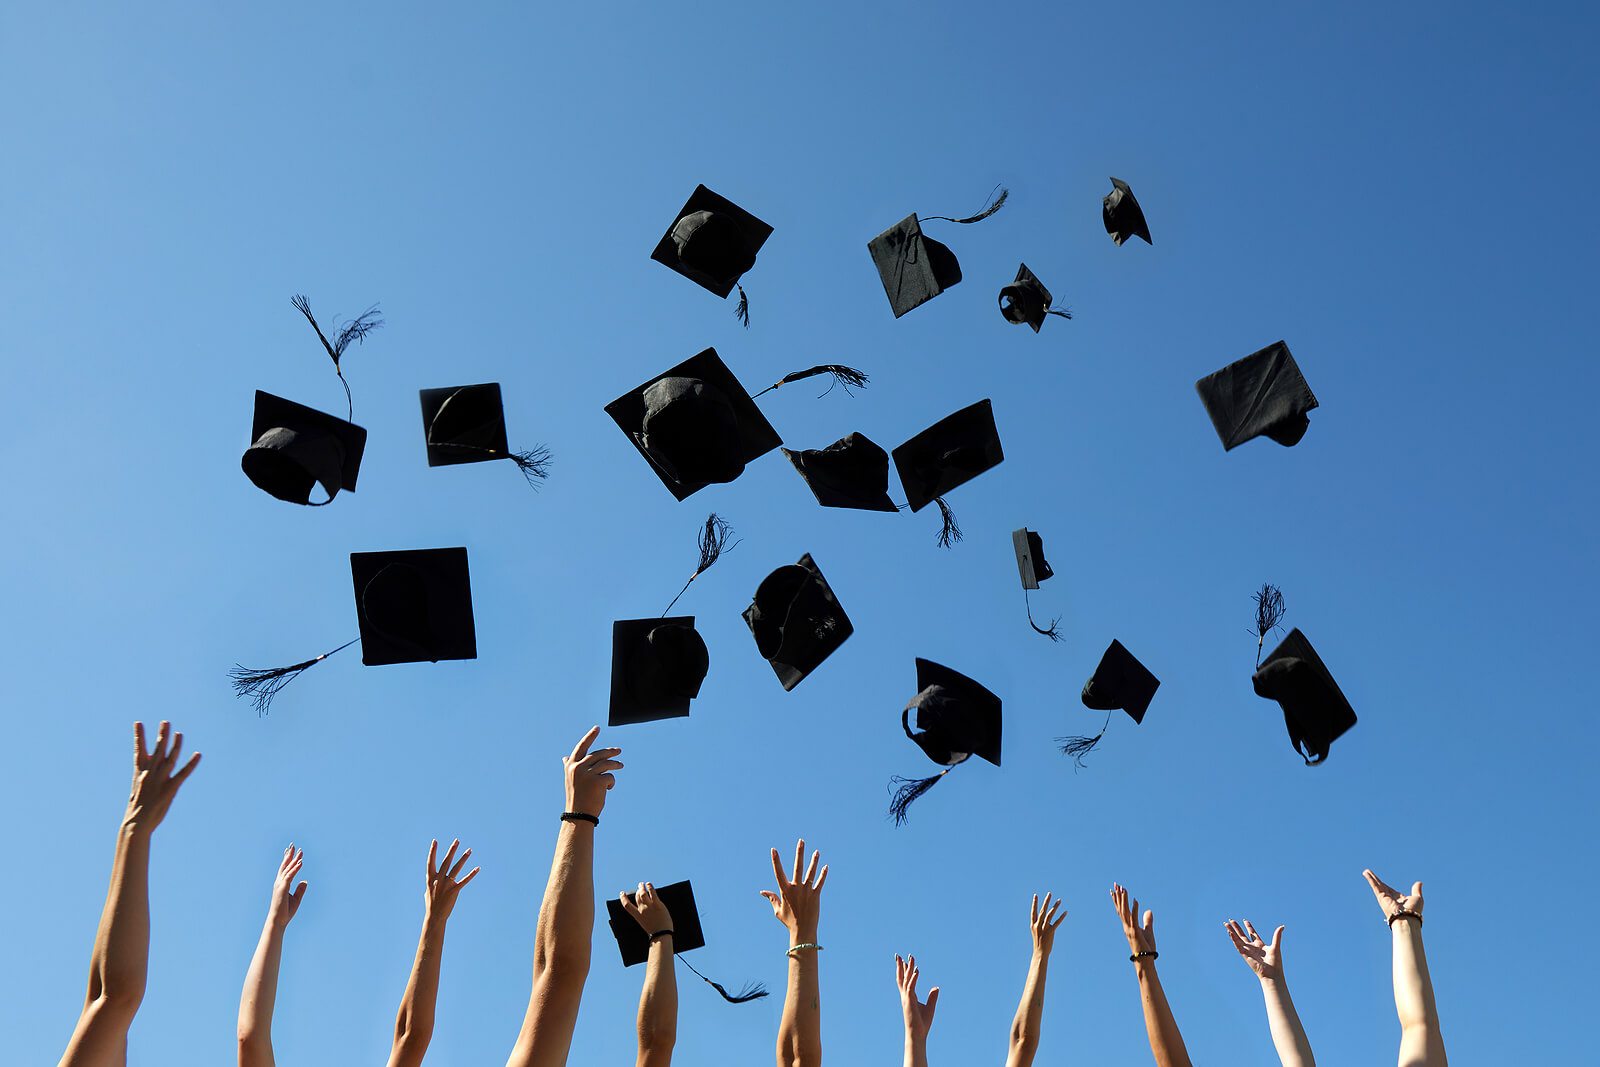 Graduation caps being thrown in the air against a blue sky